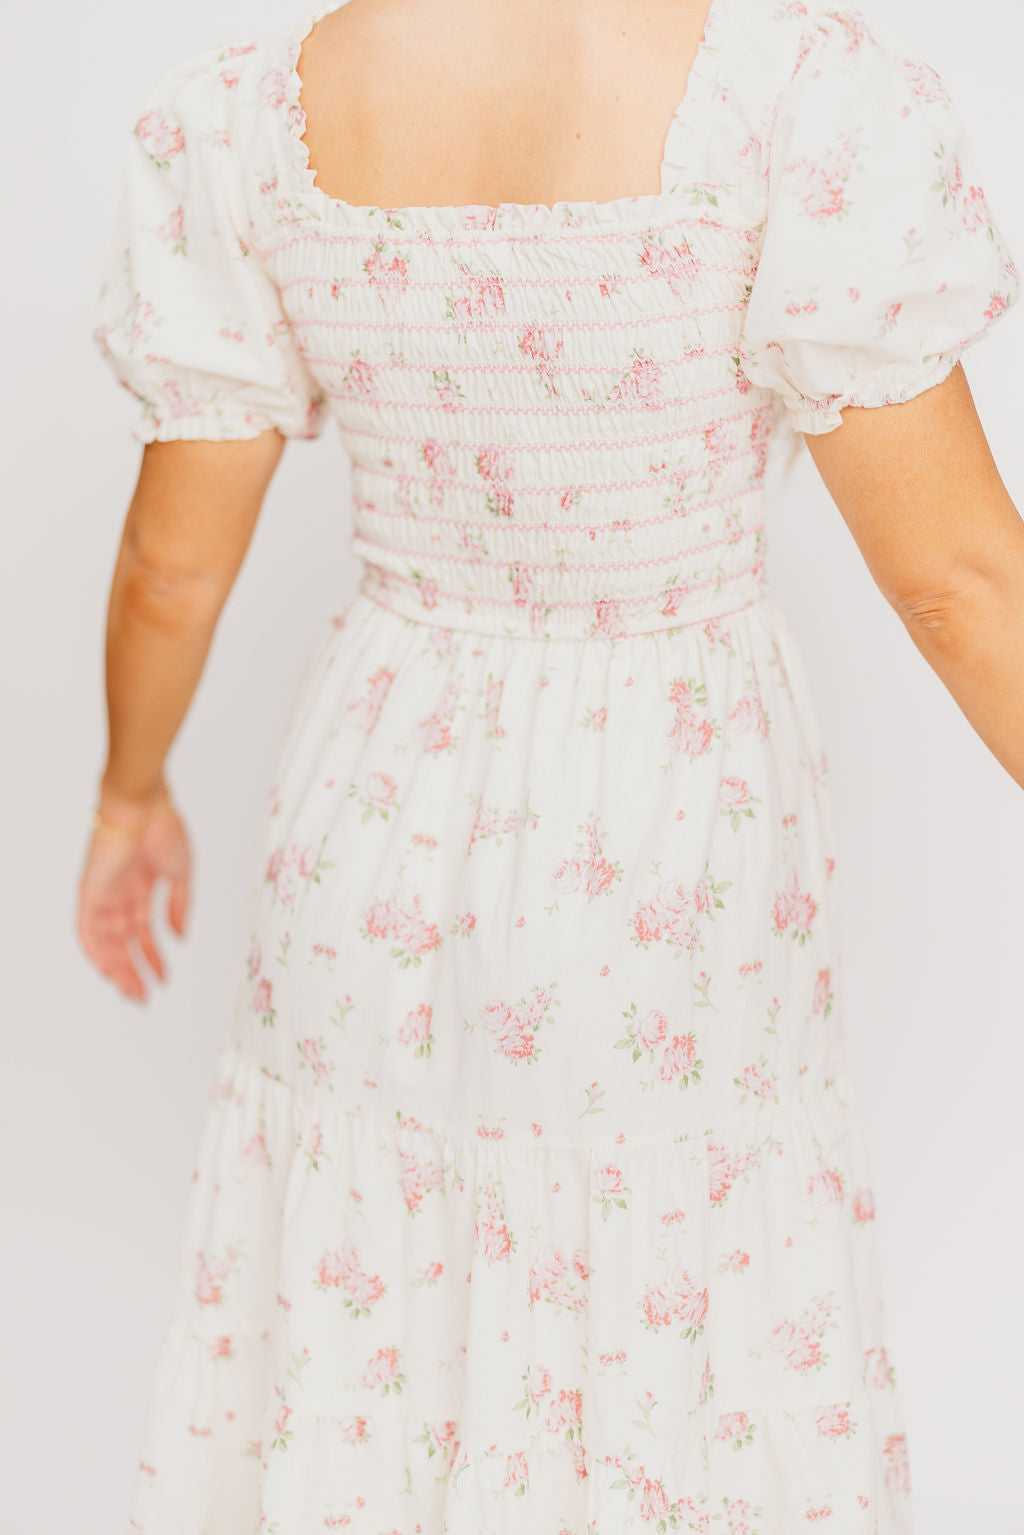 Harper Worth Maxi Dress in Ivory/Pink Floral - Inclusive Sizing (S-3XL) - Bump Friendly (Sale Dress of the Week $40 off!)